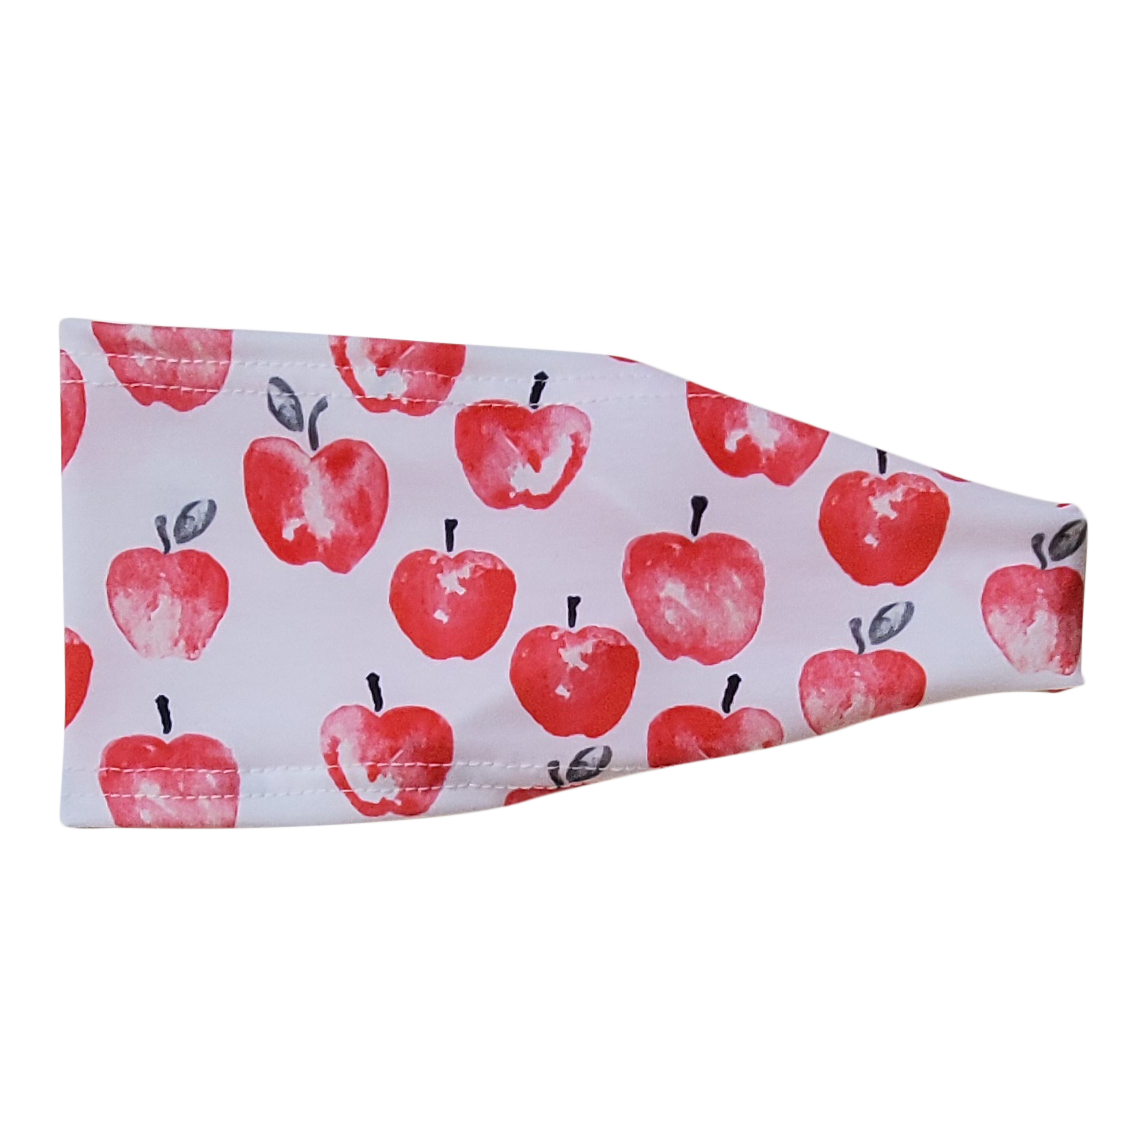 red apples on white fabric